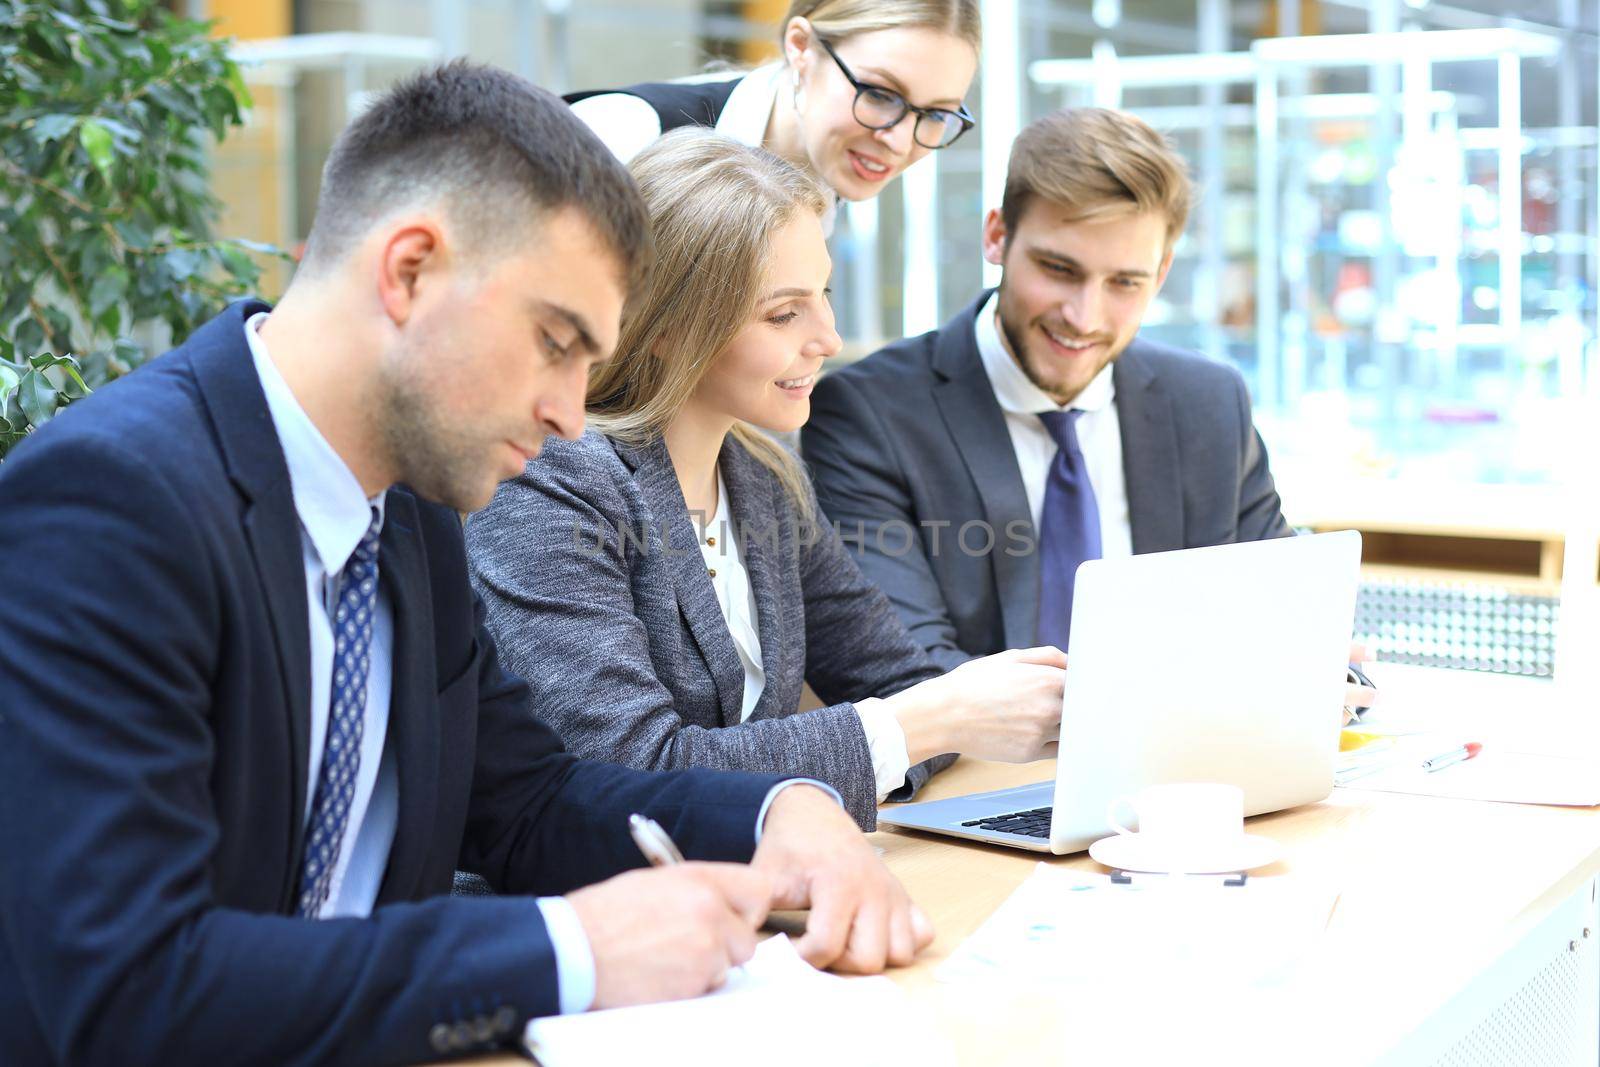 Startup business team on meeting in modern bright office interior and working on laptop